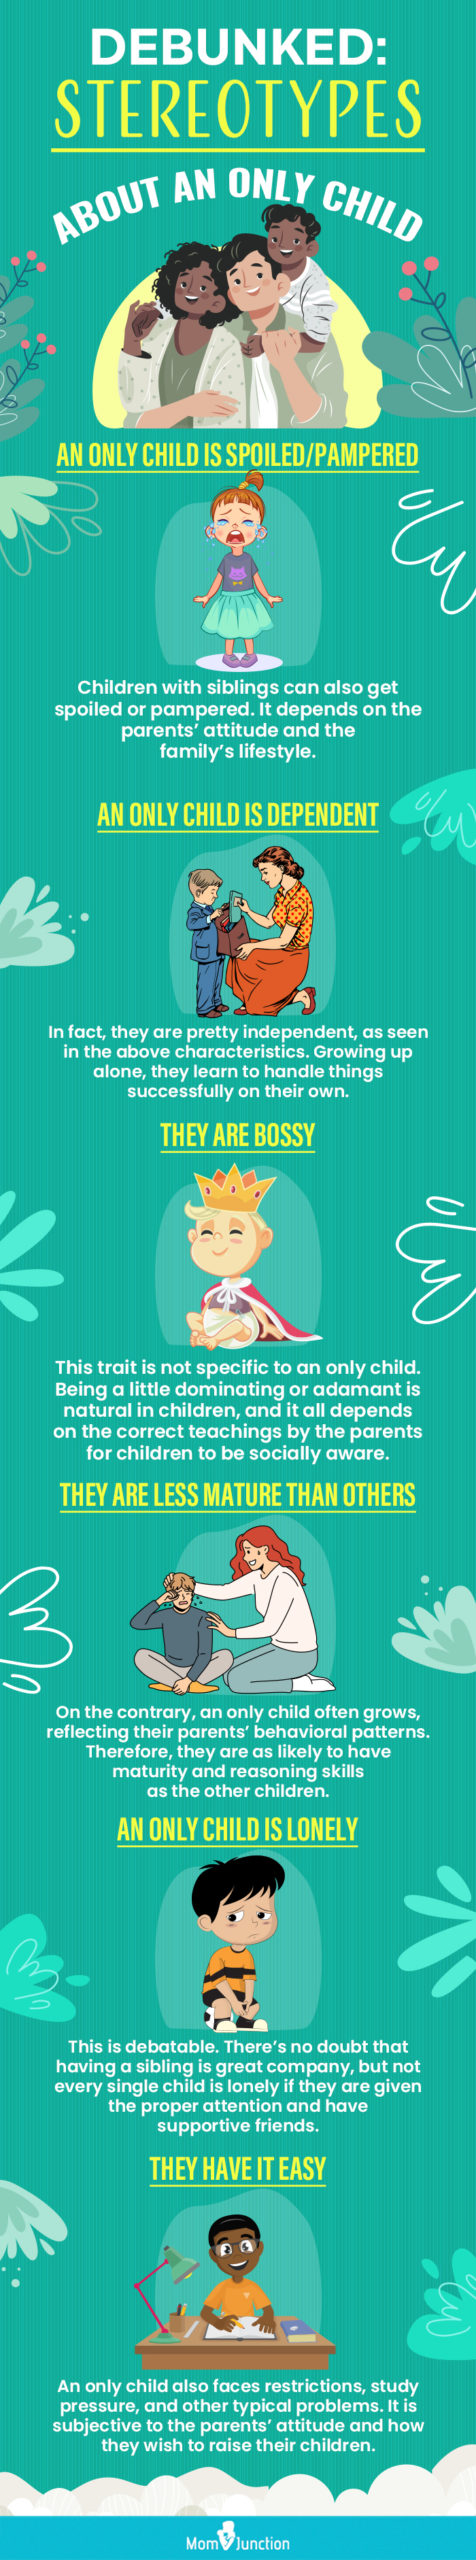 debunked stereotypes about an only child (infographic)